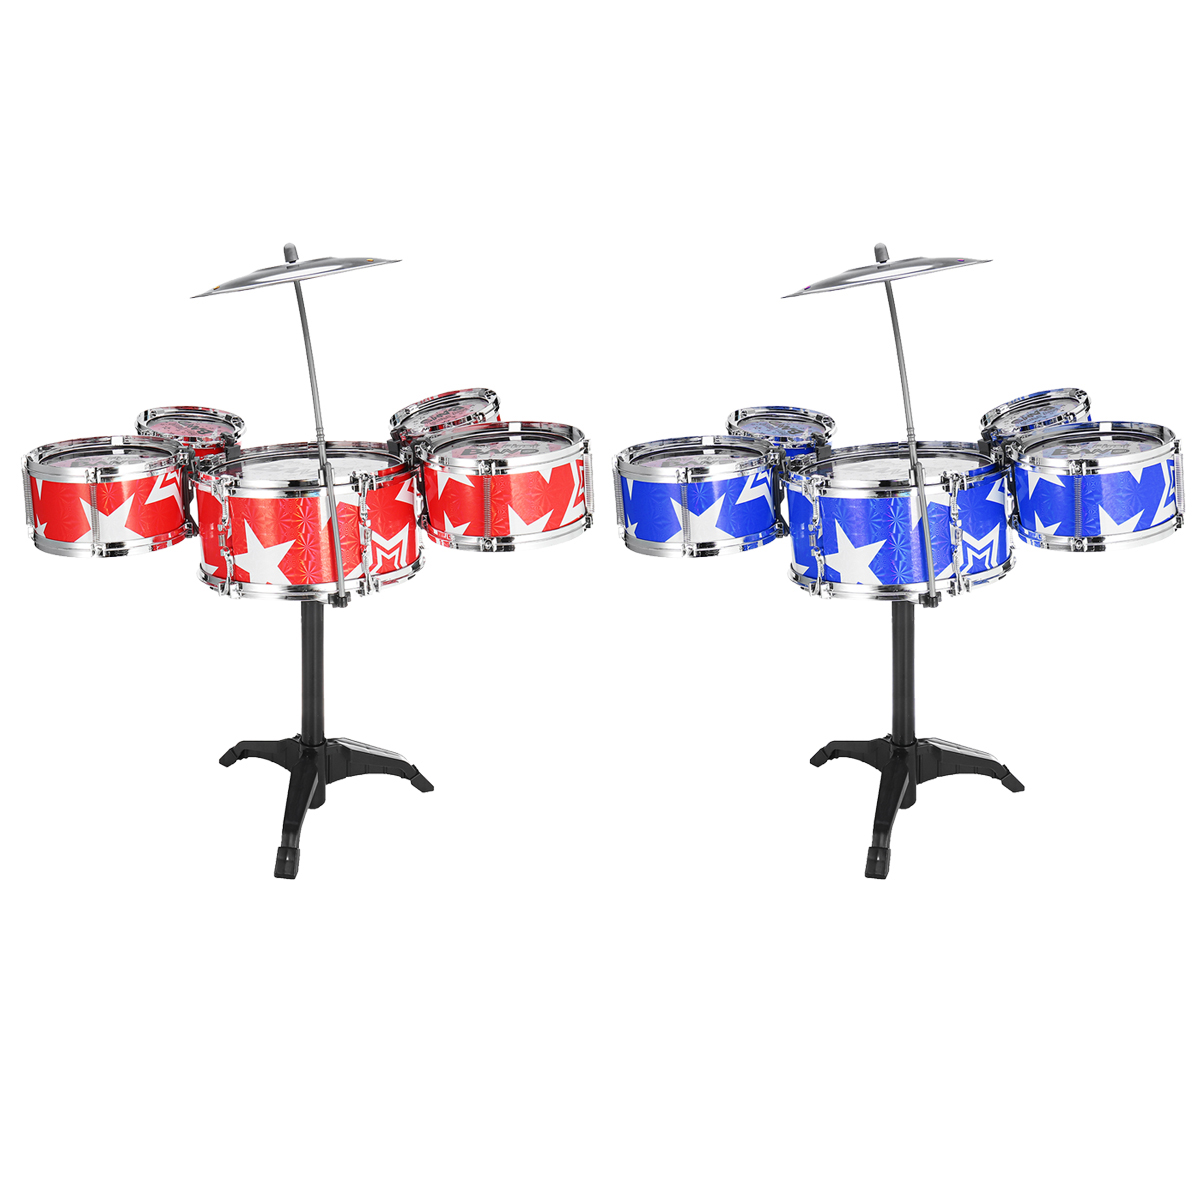 9Pcs-Childs-Kids-Drum-Kit-Jazz-Band-Sound-Drums-Play-Set-Musical-Toy-With-Stool-Drumsticks-1427947